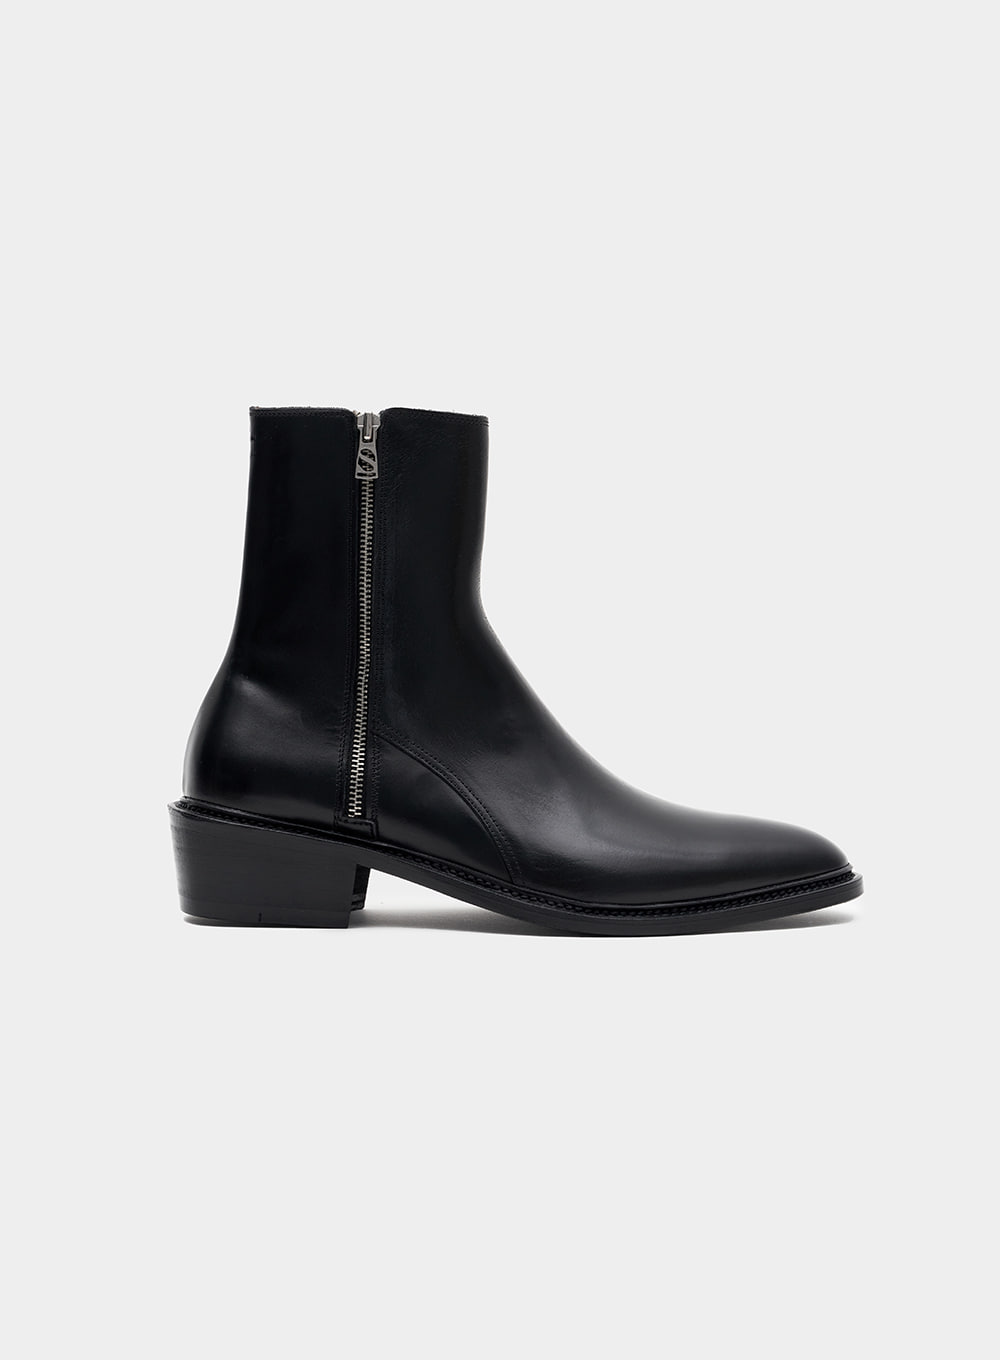 Nuuk Leather 2Way Chelsea Boots